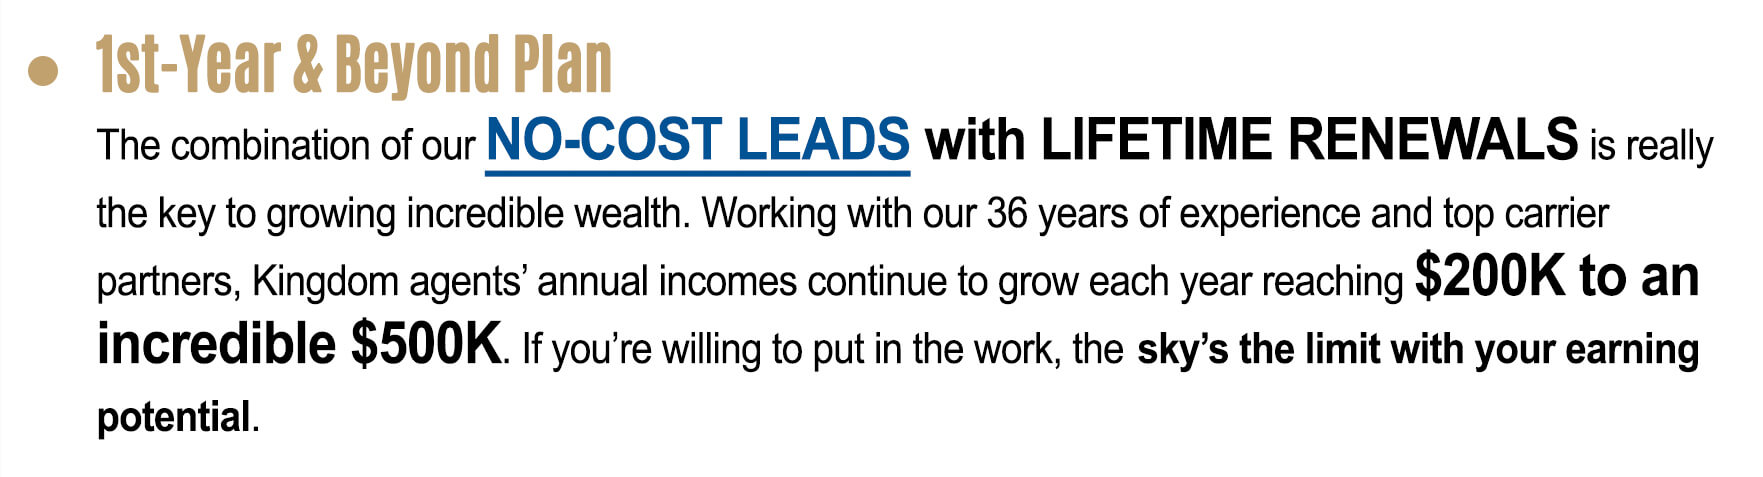 1st â€“ Year & Beyond Plan: The combination of our no- cost lead with lifetime renewals is really the key to growing incredible wealth. Working with out 36 years of experience and top carrier partners, Kingdom agents’ annual incomes continue to grow each year reaching $200,000 to an incredible $500,000. If you’re willing to put in work, the sky’s the limit with your earning potential.